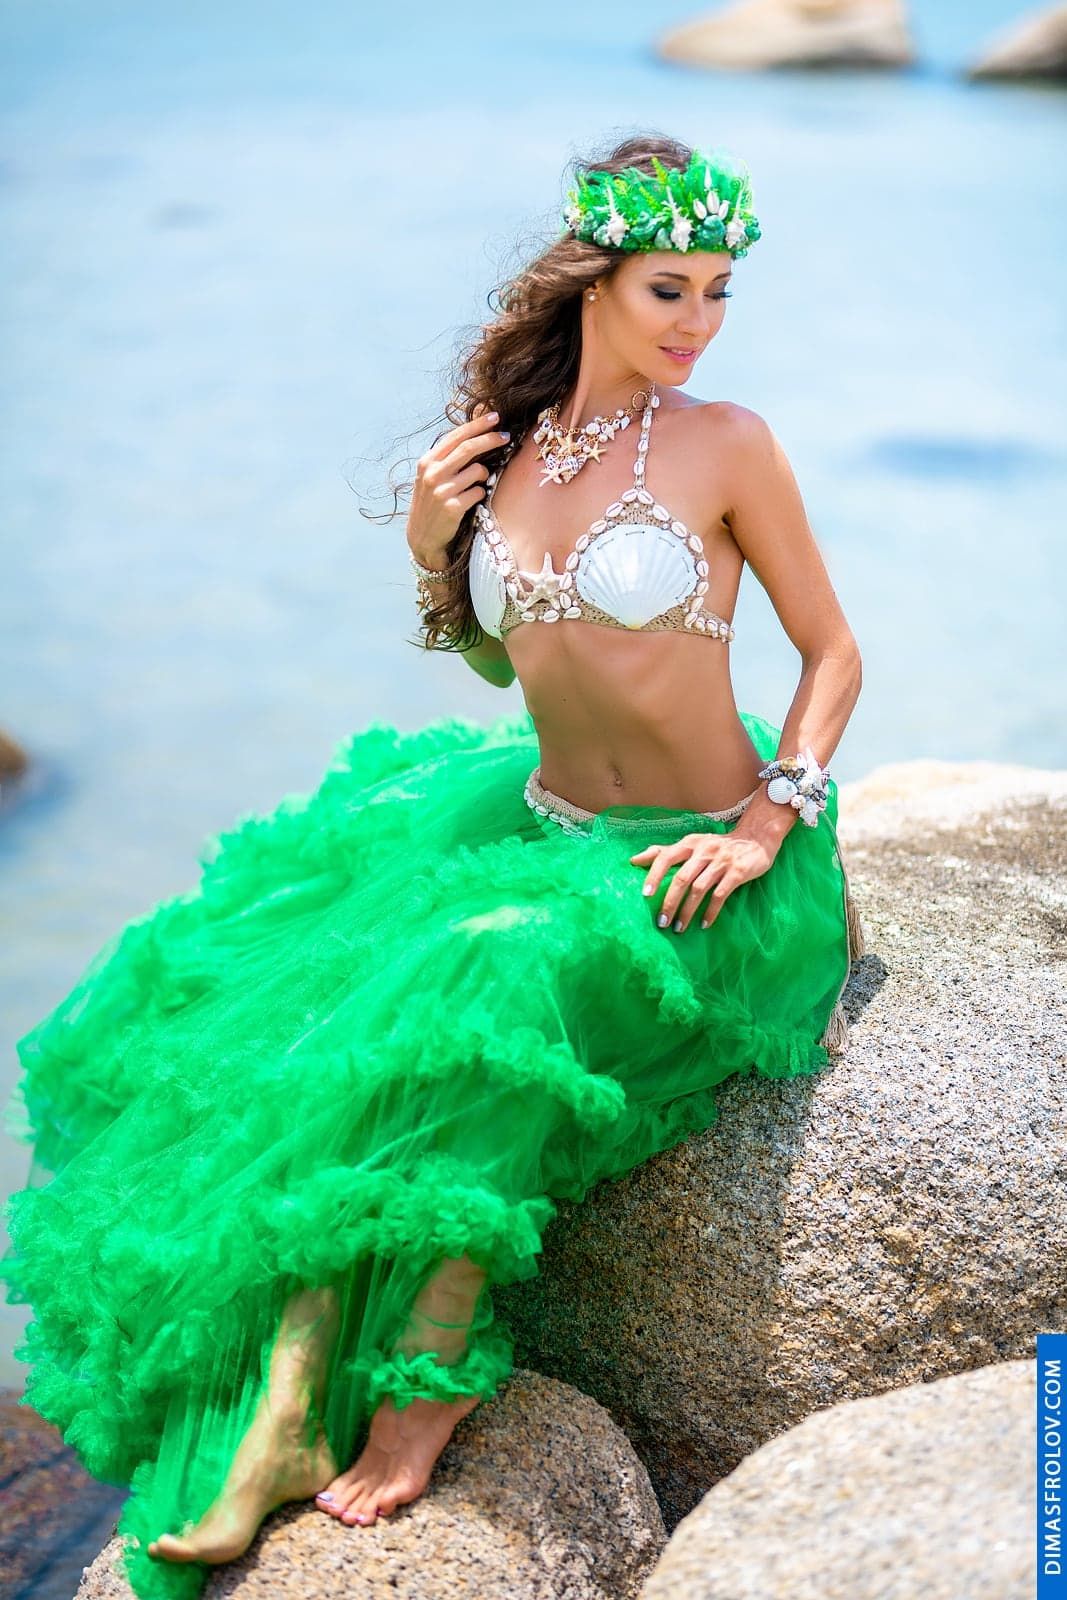 Unique shell accessories for a themed photo shoot on Koh Samui. photographer Dimas Frolov. photo1652